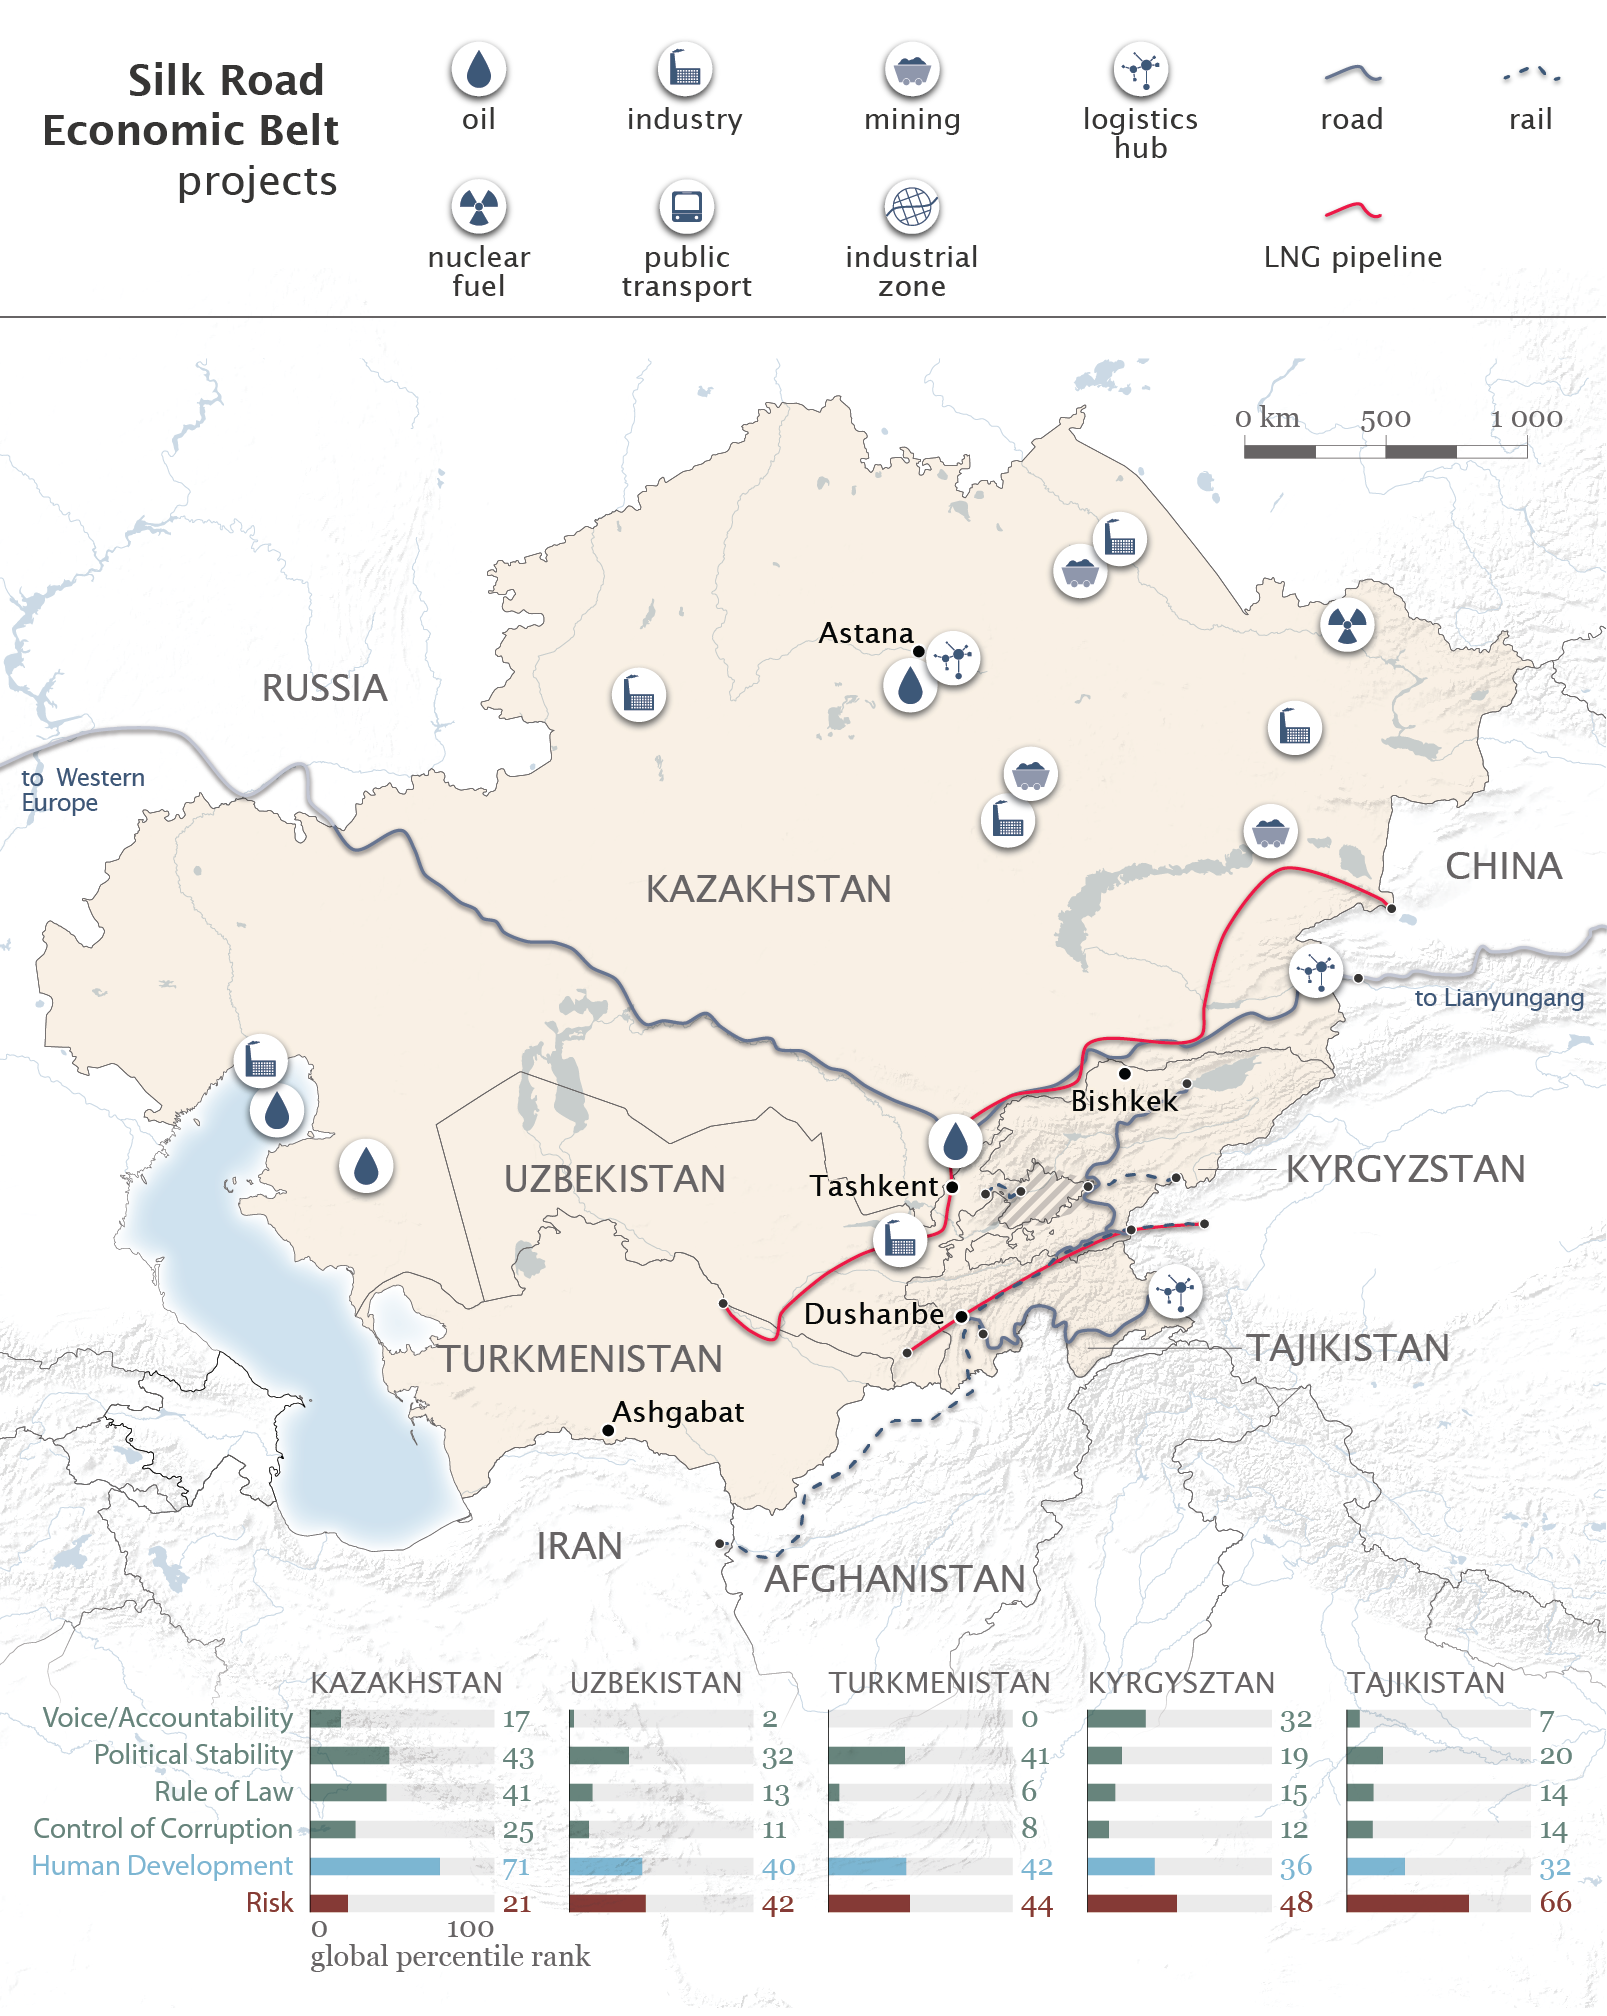 Map of Central Asia illustrating Silk Road Economic Belt projects and fragility indicators per state